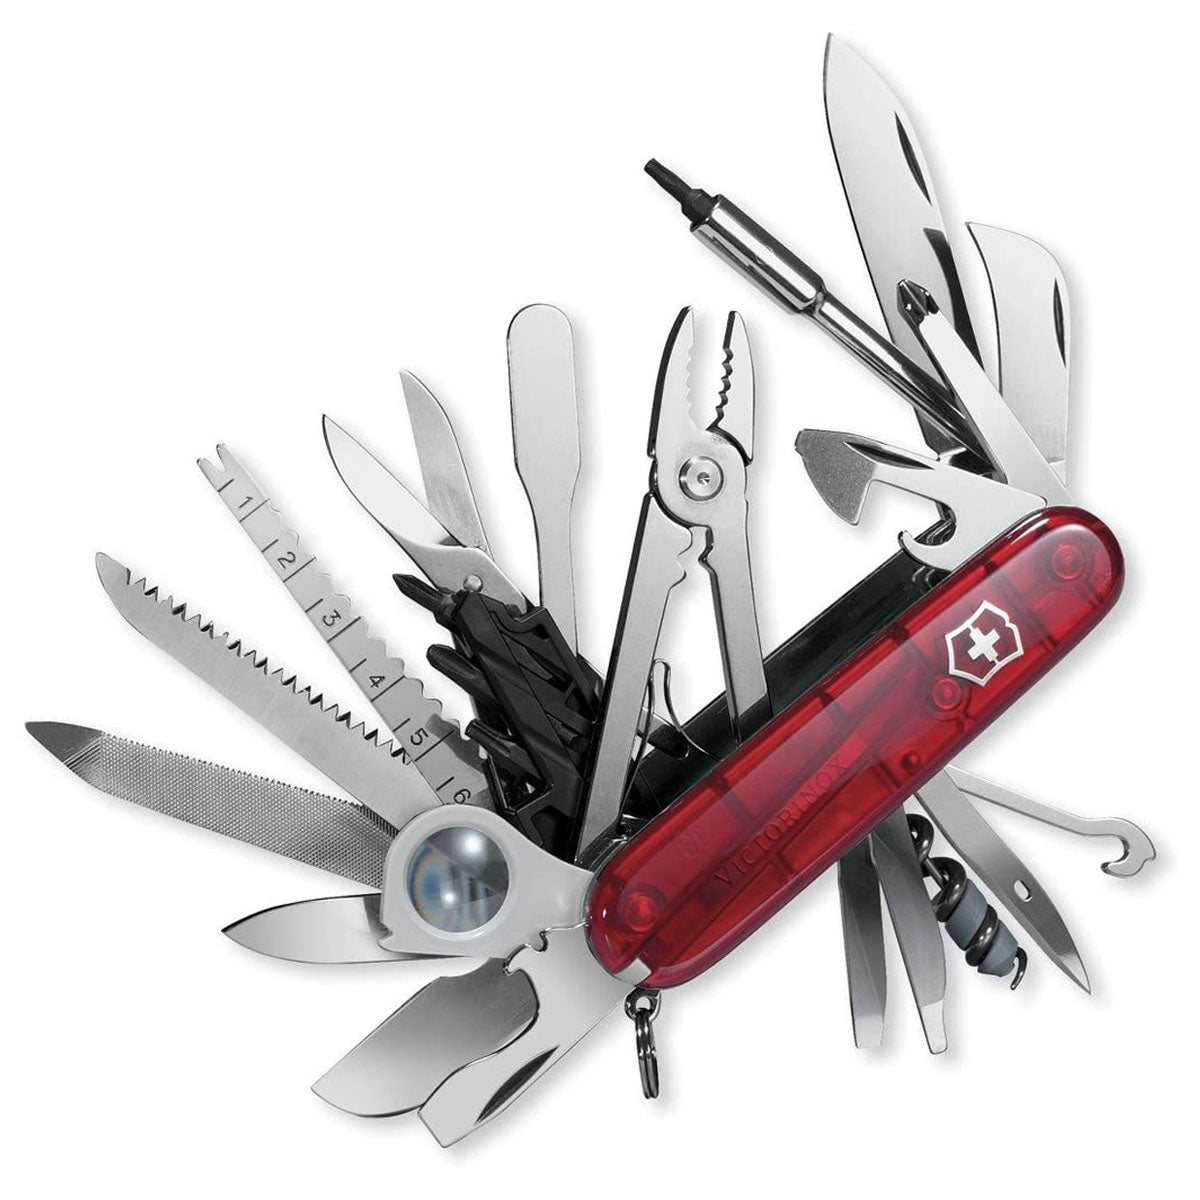 Can a 91mm victorinox scissor be fitted in place of the blade on a